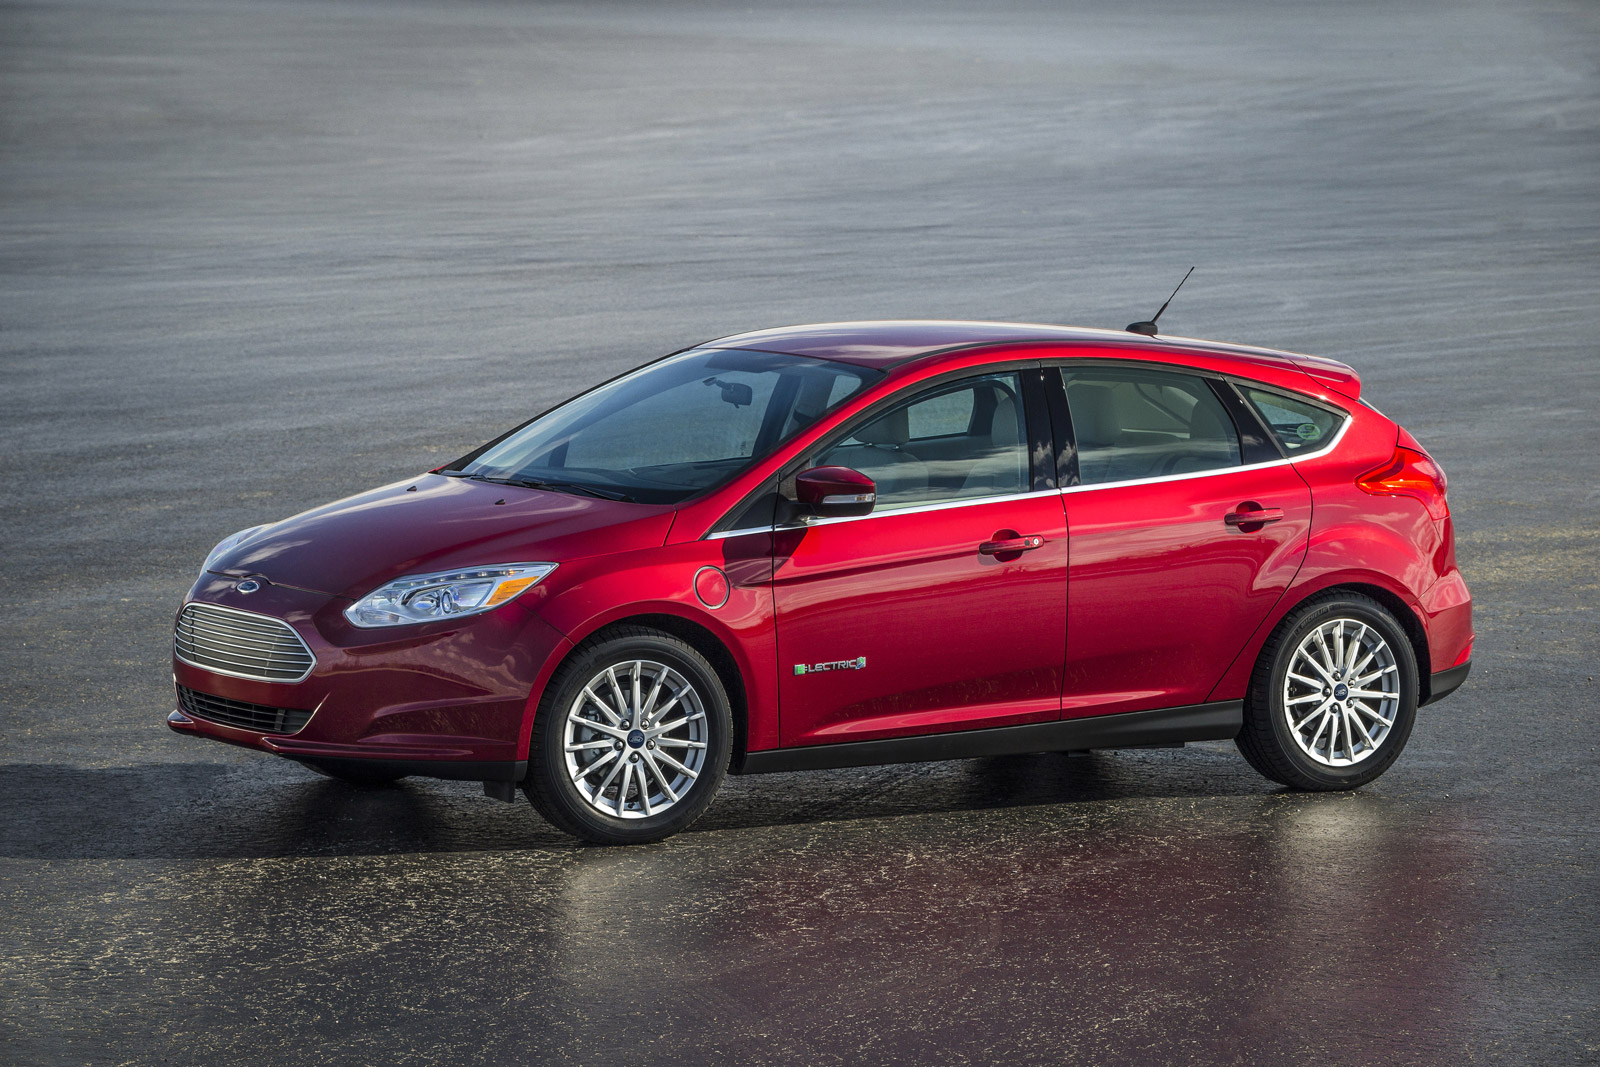 2015 Ford Focus Electric Price Cut To $29,995, A $6K Drop: Report